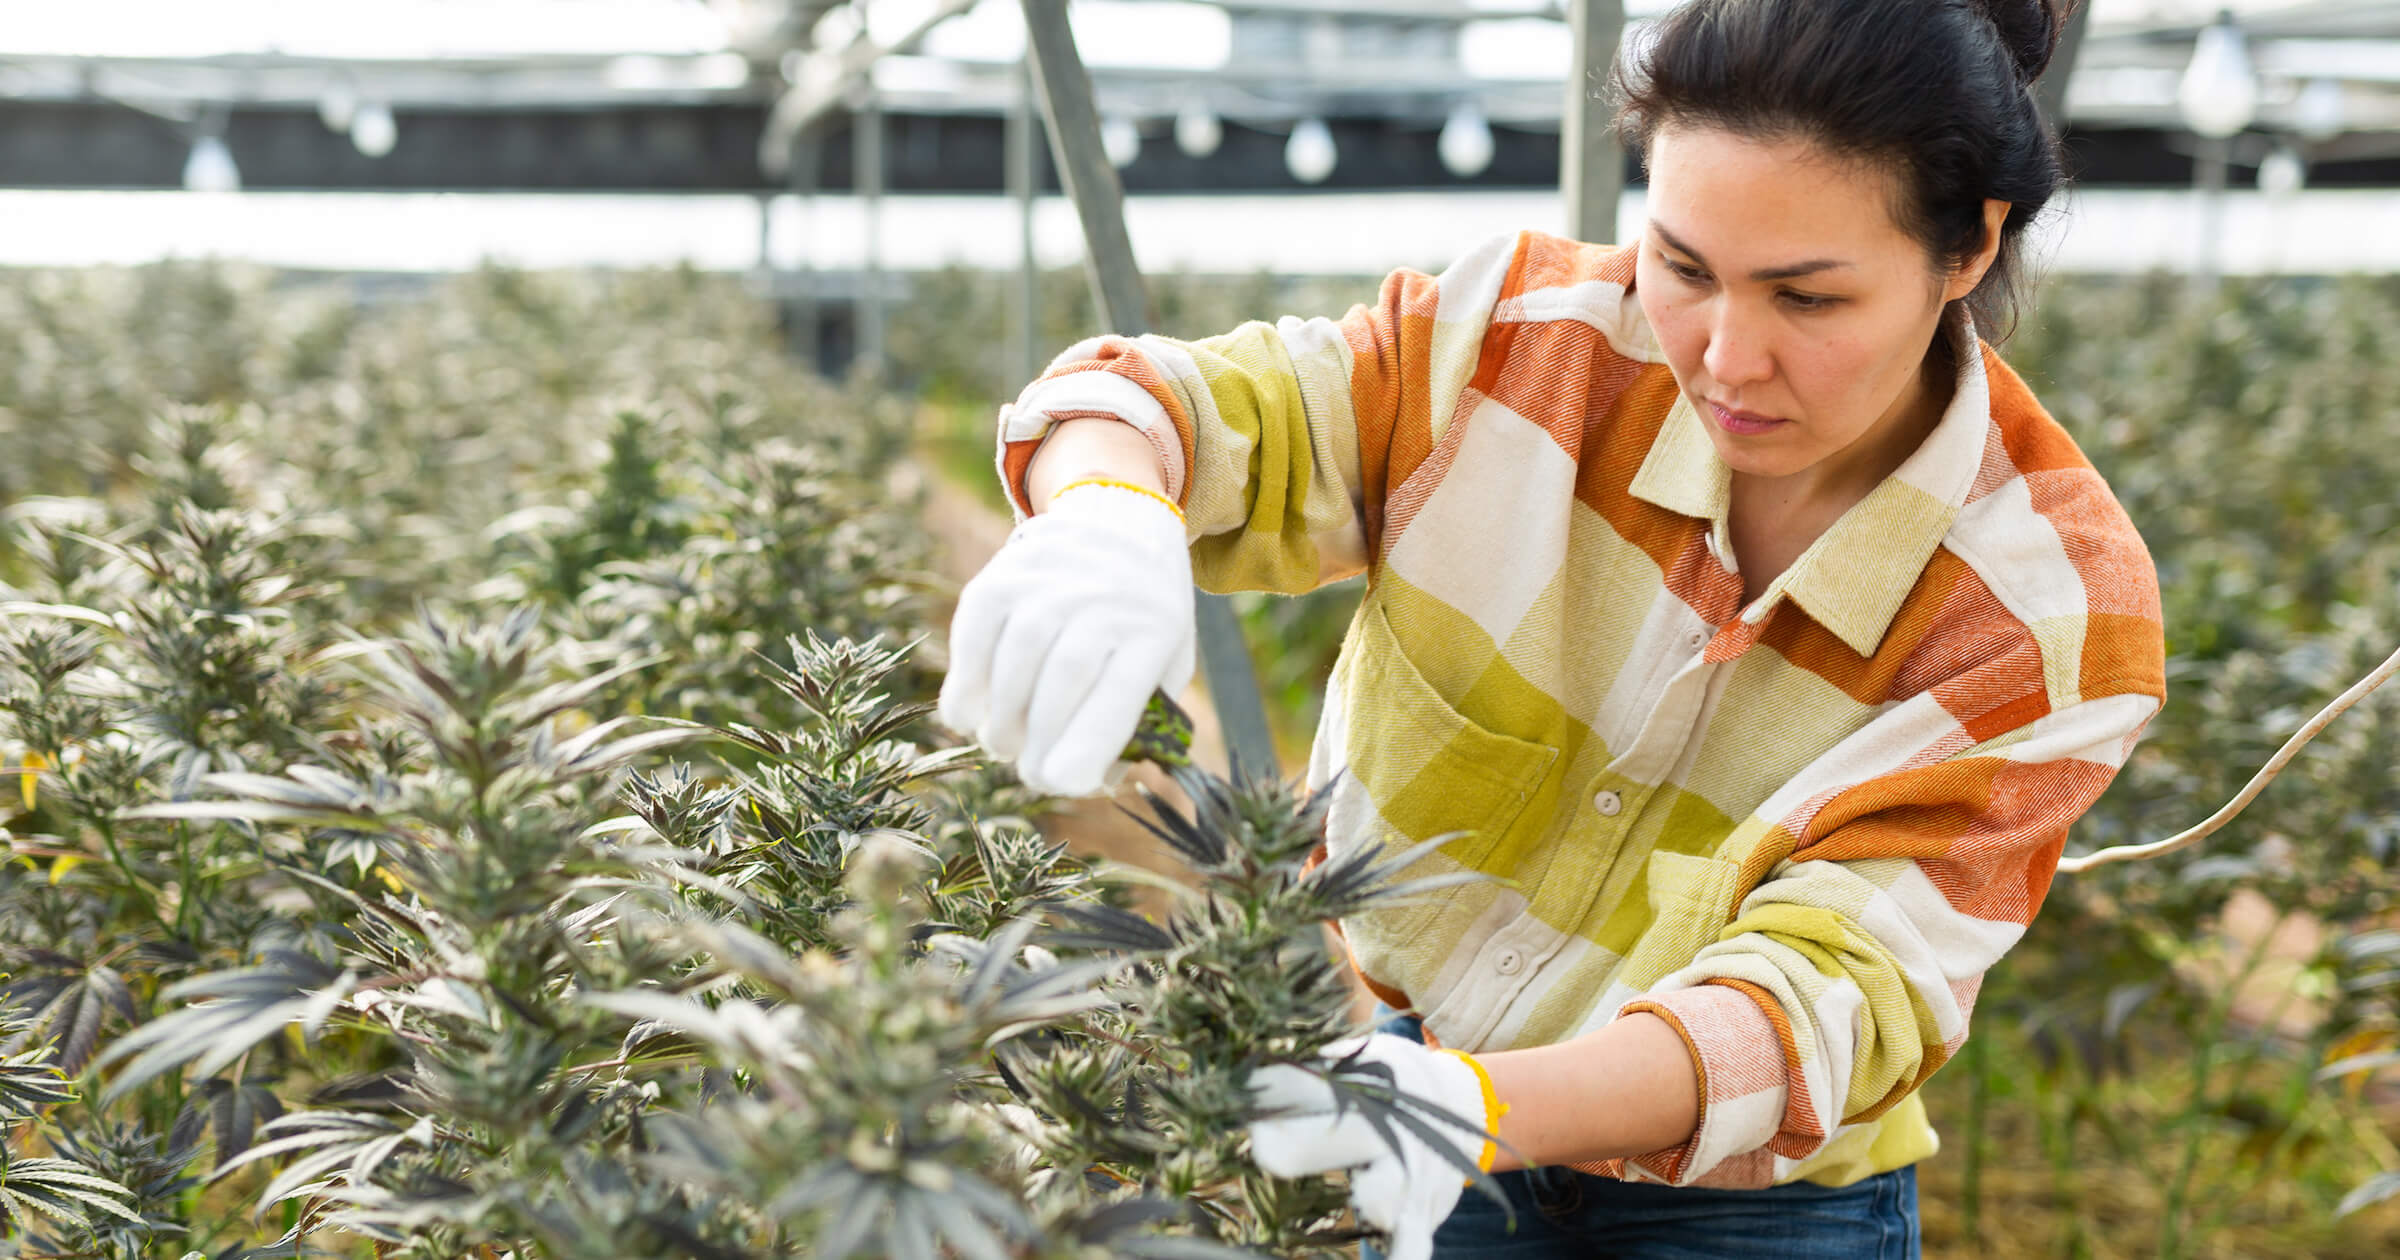 21 Tips for Building a Wildly Successful Cannabis Business